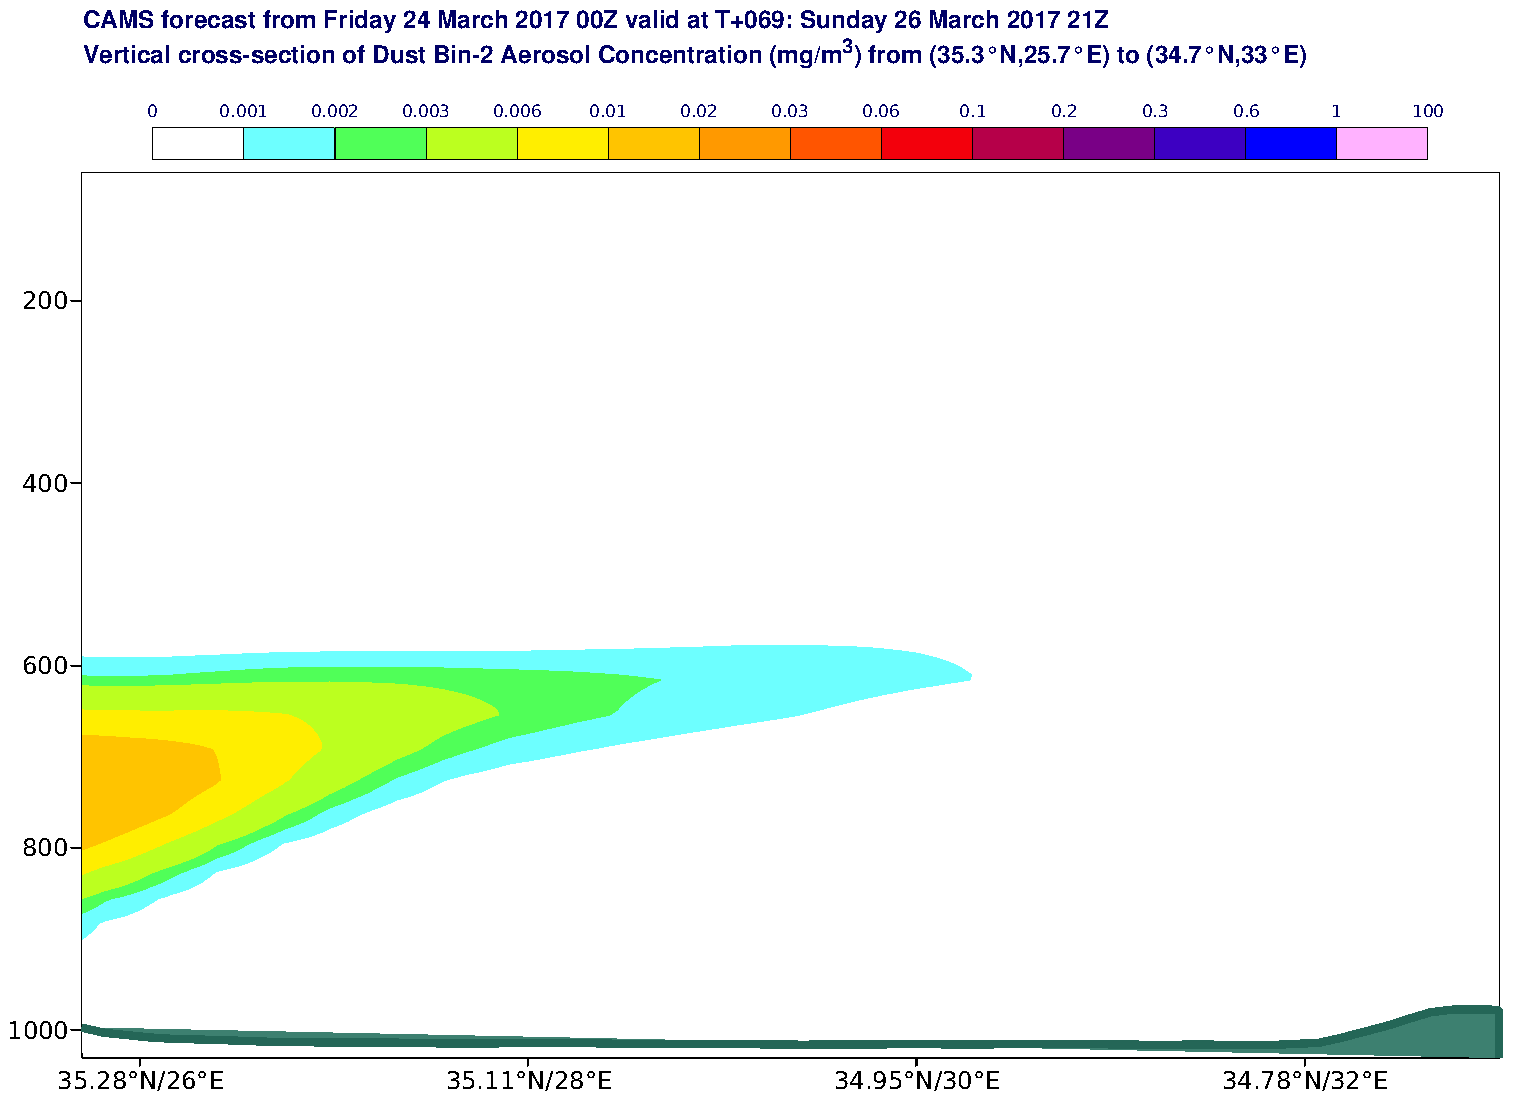 Vertical cross-section of Dust Bin-2 Aerosol Concentration (mg/m3) valid at T69 - 2017-03-26 21:00